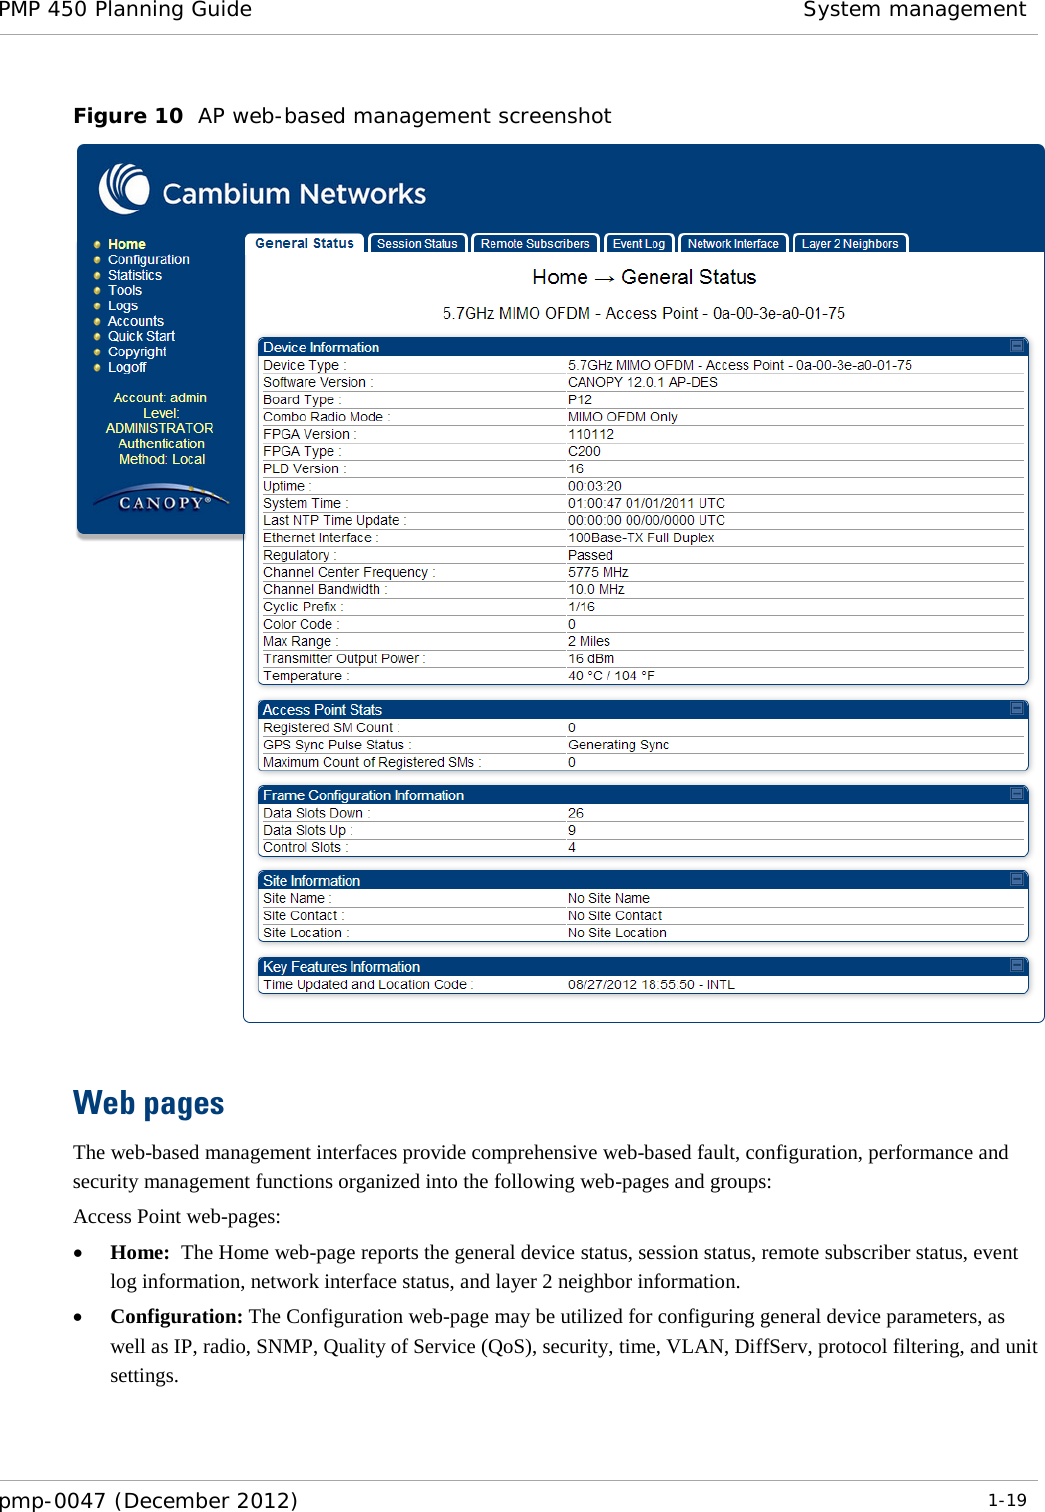 PMP 450 Planning Guide System management  pmp-0047 (December 2012)  1-19  Figure 10  AP web-based management screenshot   Web pages The web-based management interfaces provide comprehensive web-based fault, configuration, performance and security management functions organized into the following web-pages and groups: Access Point web-pages: • Home:  The Home web-page reports the general device status, session status, remote subscriber status, event log information, network interface status, and layer 2 neighbor information. • Configuration: The Configuration web-page may be utilized for configuring general device parameters, as well as IP, radio, SNMP, Quality of Service (QoS), security, time, VLAN, DiffServ, protocol filtering, and unit settings. 